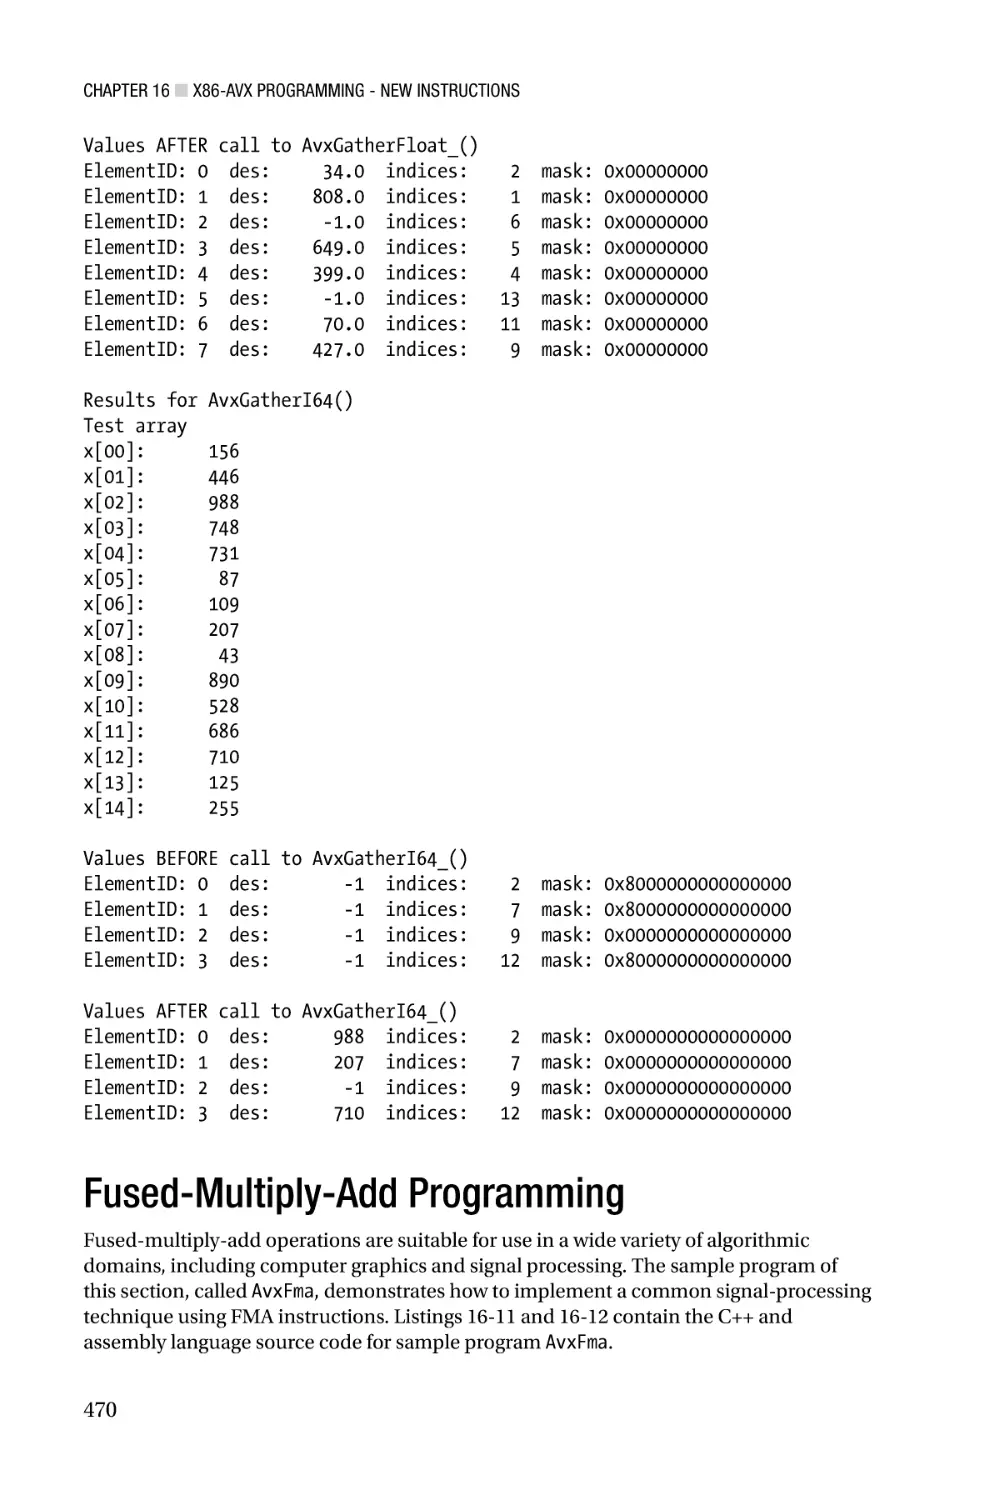 Fused-Multiply-Add Programming